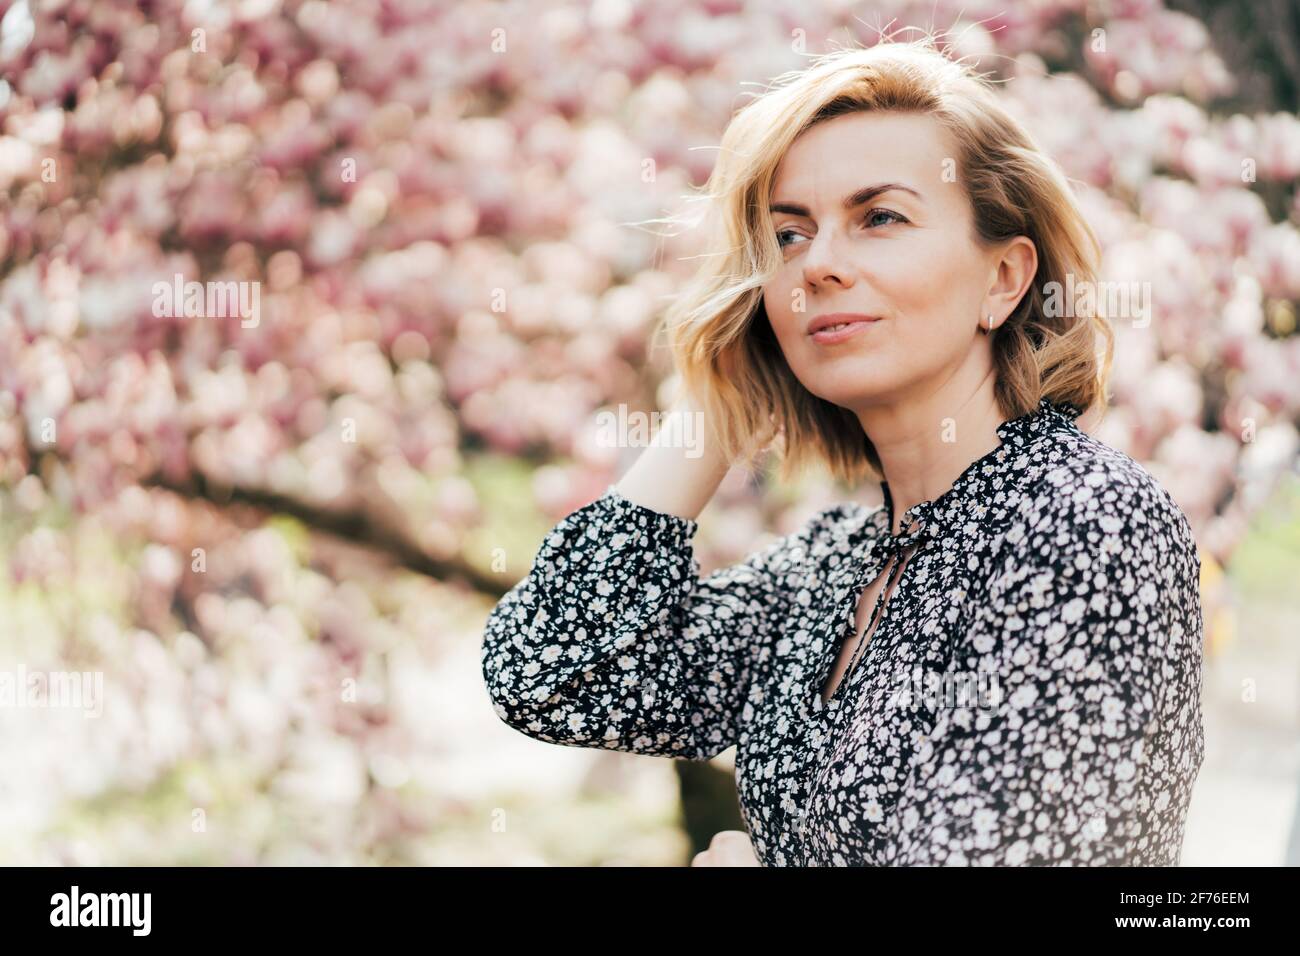 Portrait of a beautiful woman in her forties. Profile portrait with a pink flowering magnolia tree as background. Confident excellent graceful woman. Stock Photo